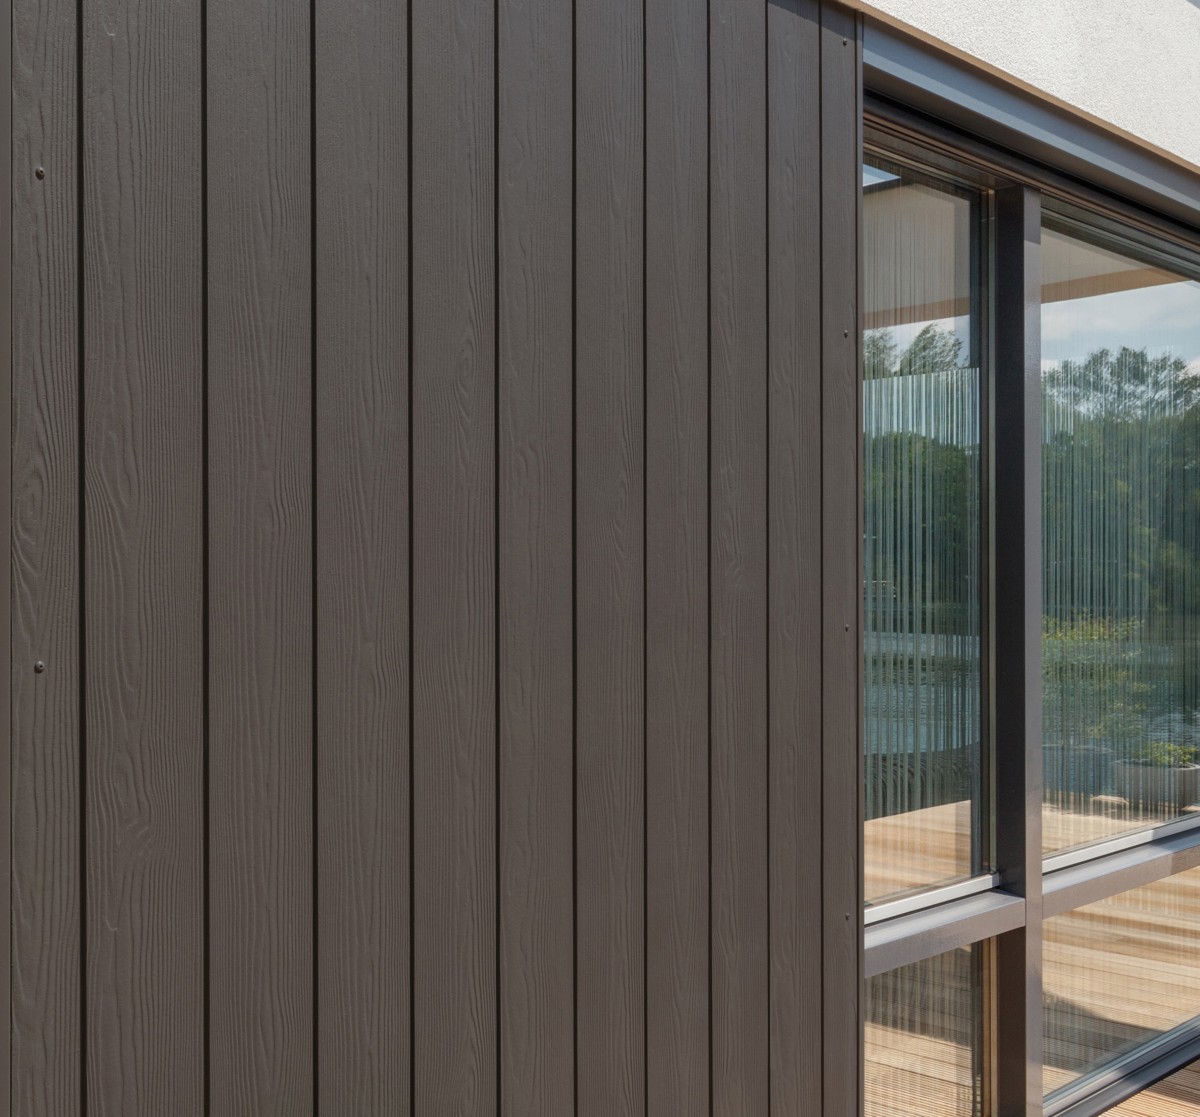 5 reasons to choose Cedral Click for a modern facade